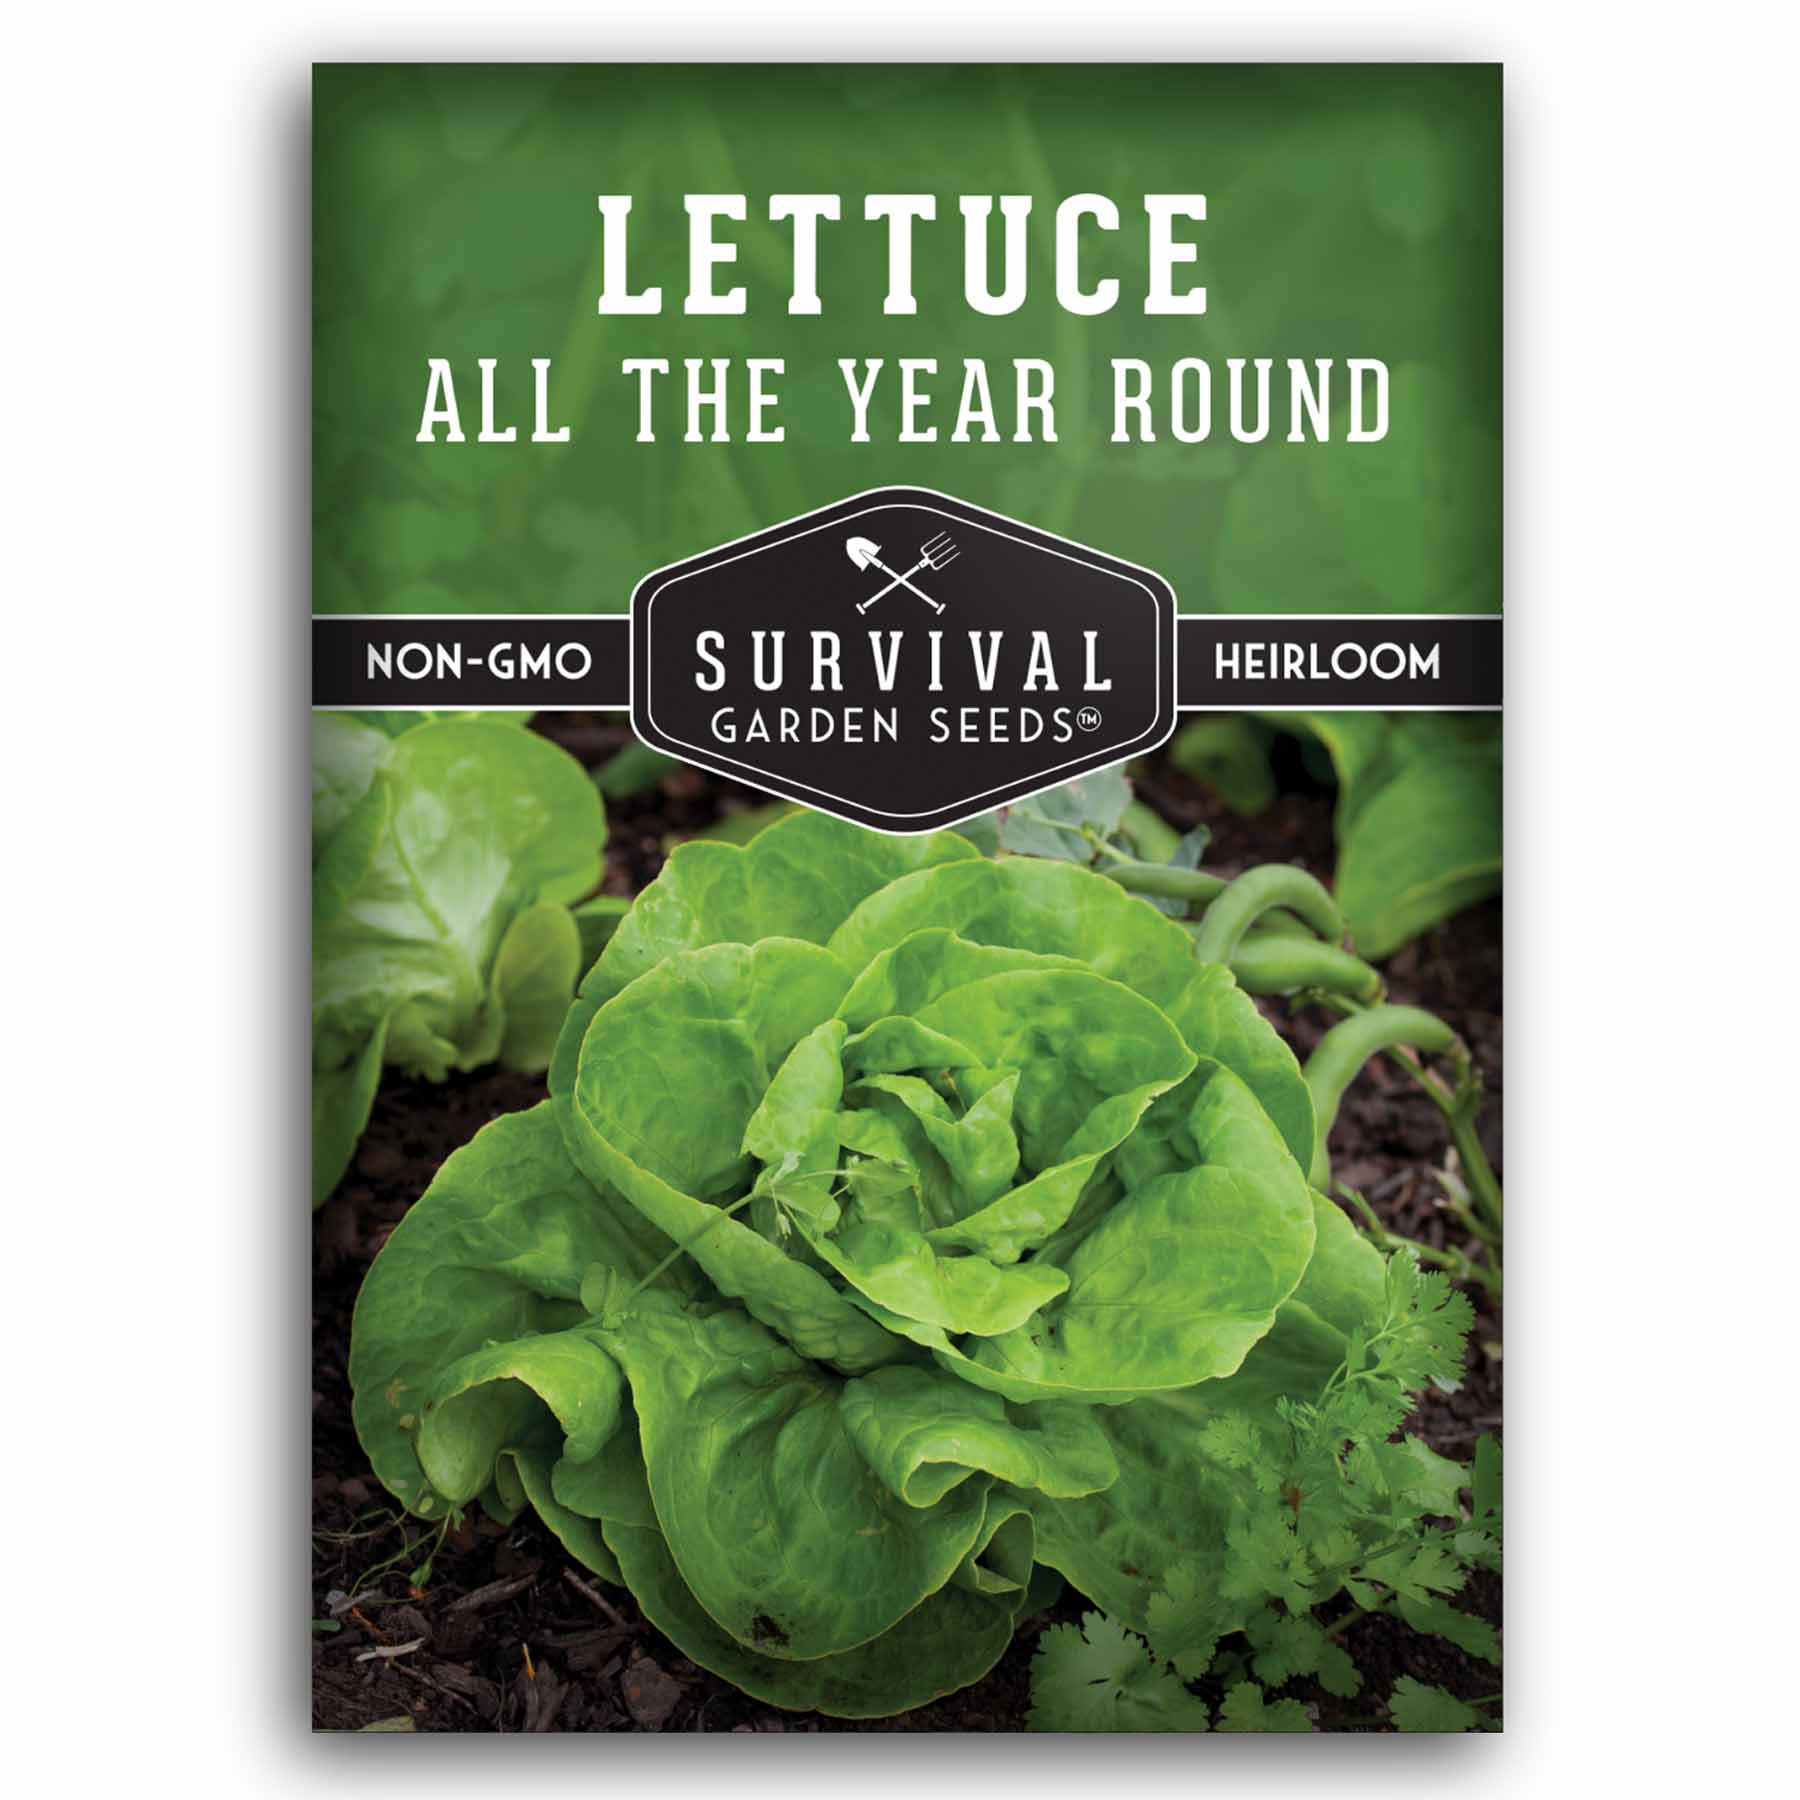 1 packet of All the Year Round Lettuce seeds